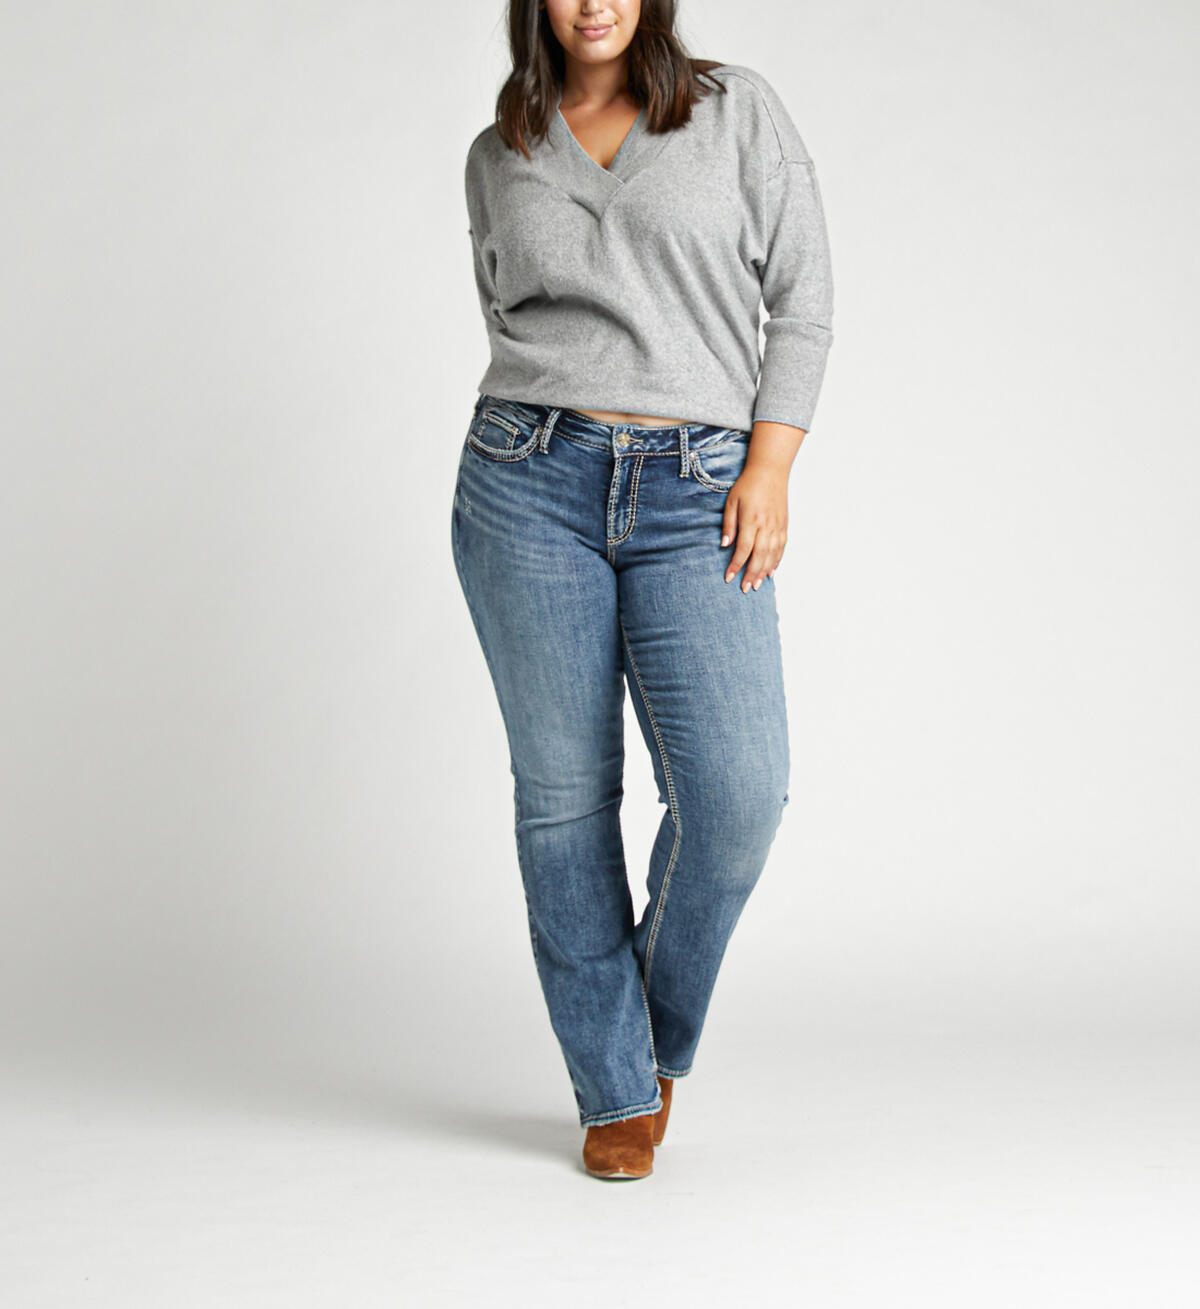 Elyse Mid Rise Bootcut Plus Size Jeans, , hi-res image number 0